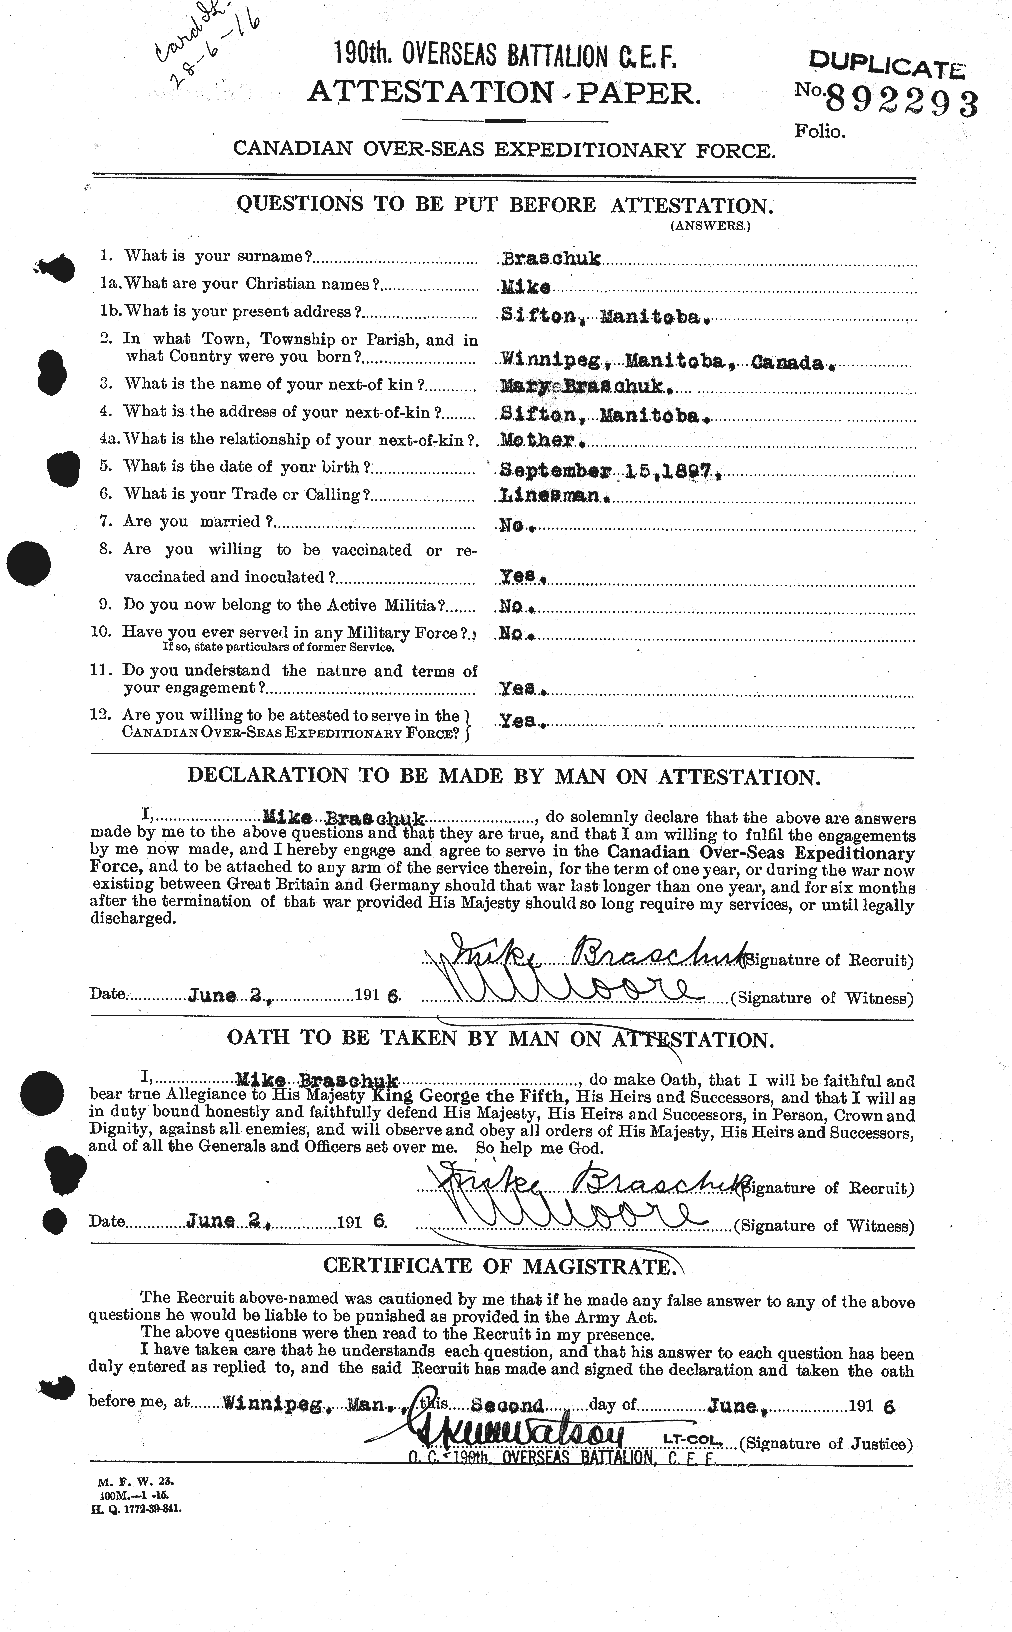 Personnel Records of the First World War - CEF 260415a